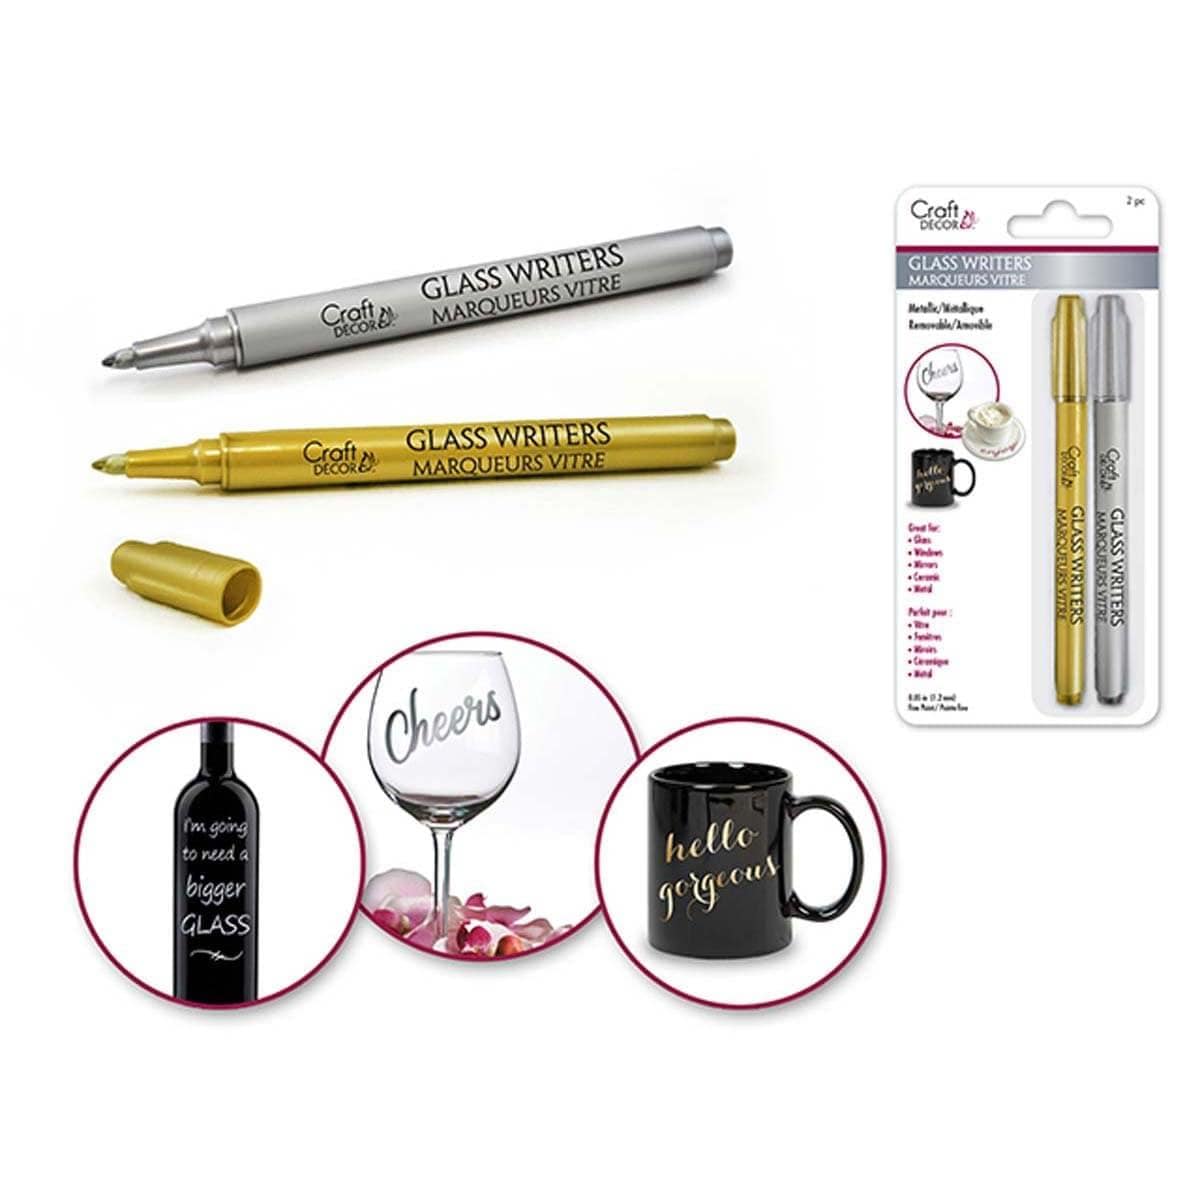 Buy Everyday Entertaining Gold & Silver Glass Writing Pens, 2 per package sold at Party Expert